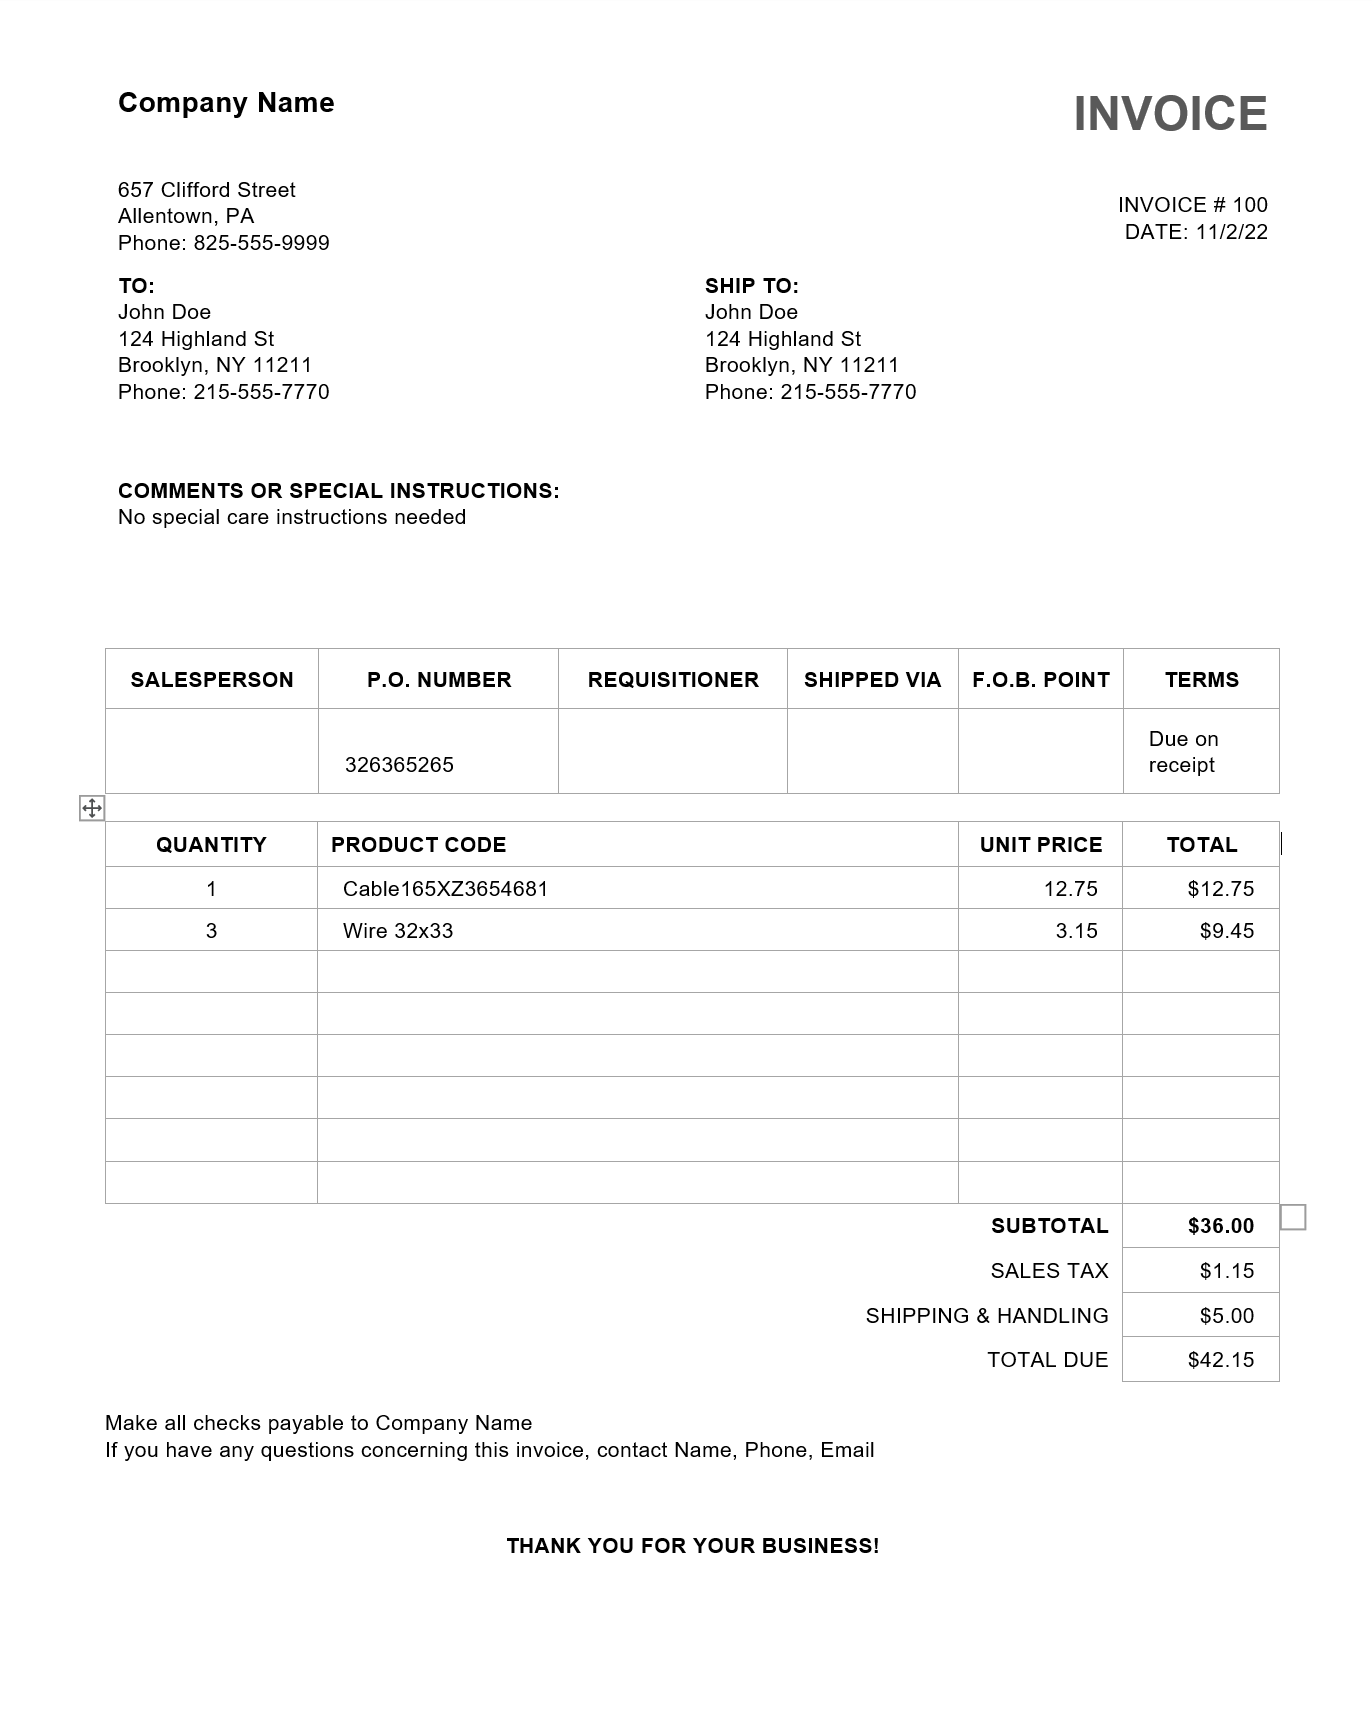 Fictitious invoice for cable and wire.